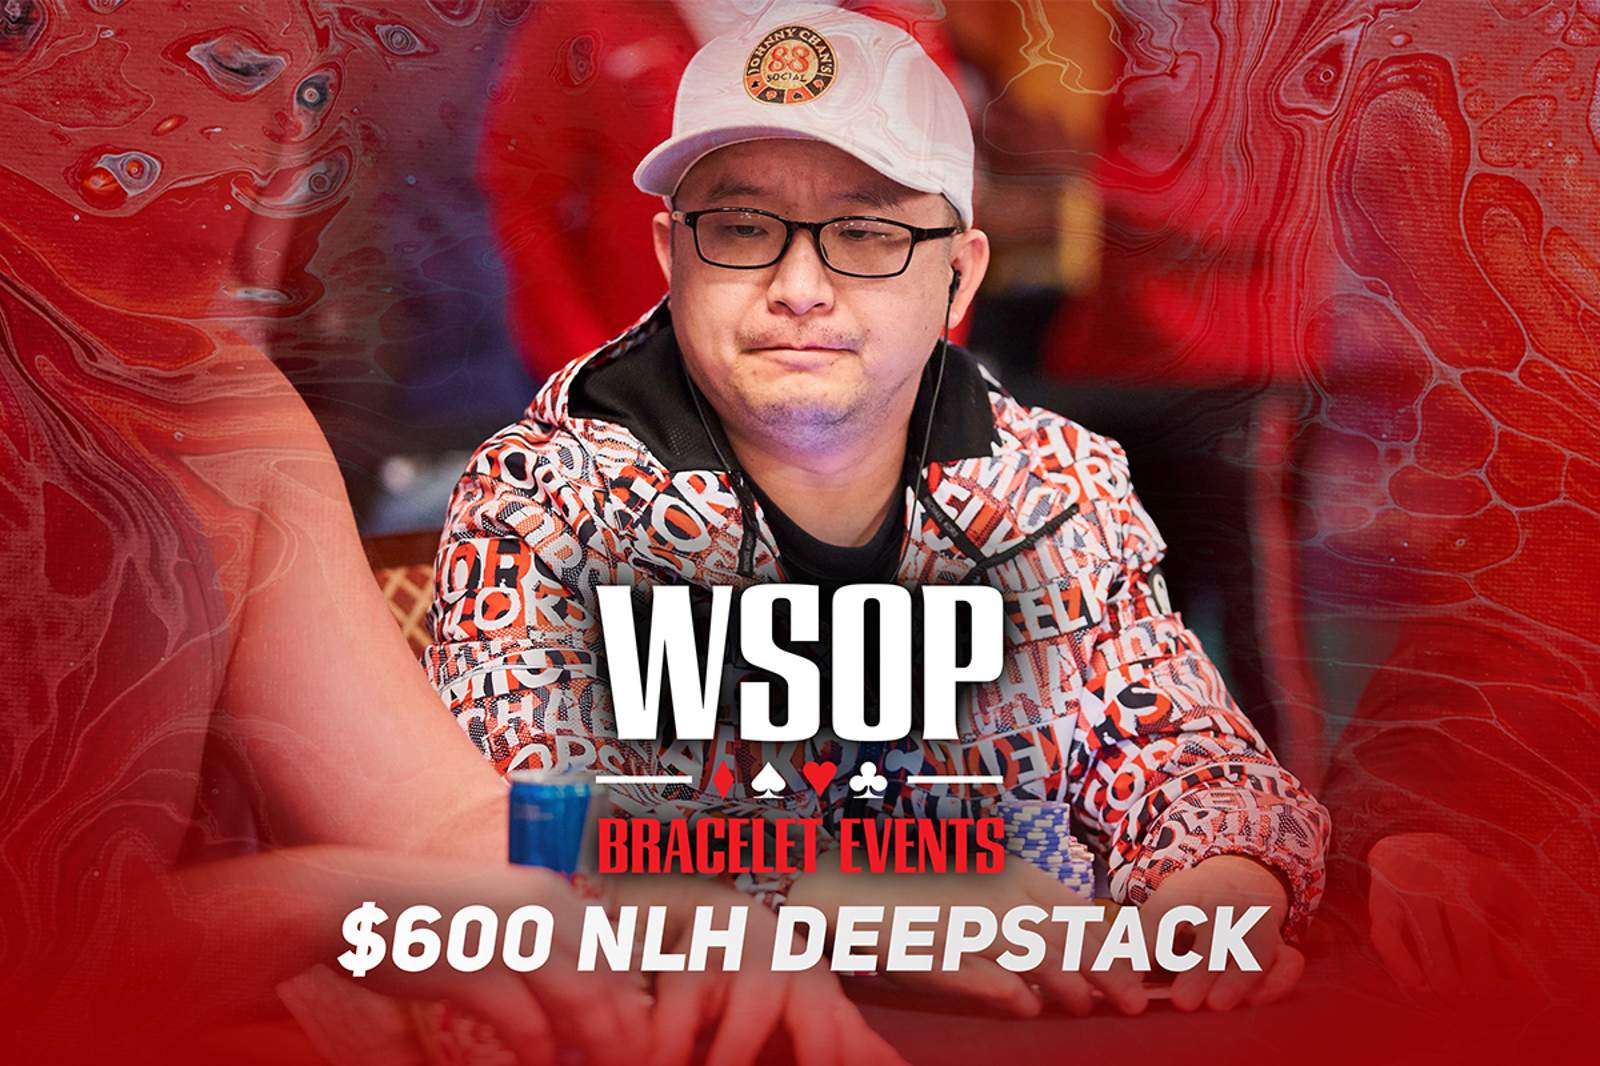 Watch the WSOP Event #8: $600 Deepstack Final Table on PokerGO.com at 8 p.m. ET